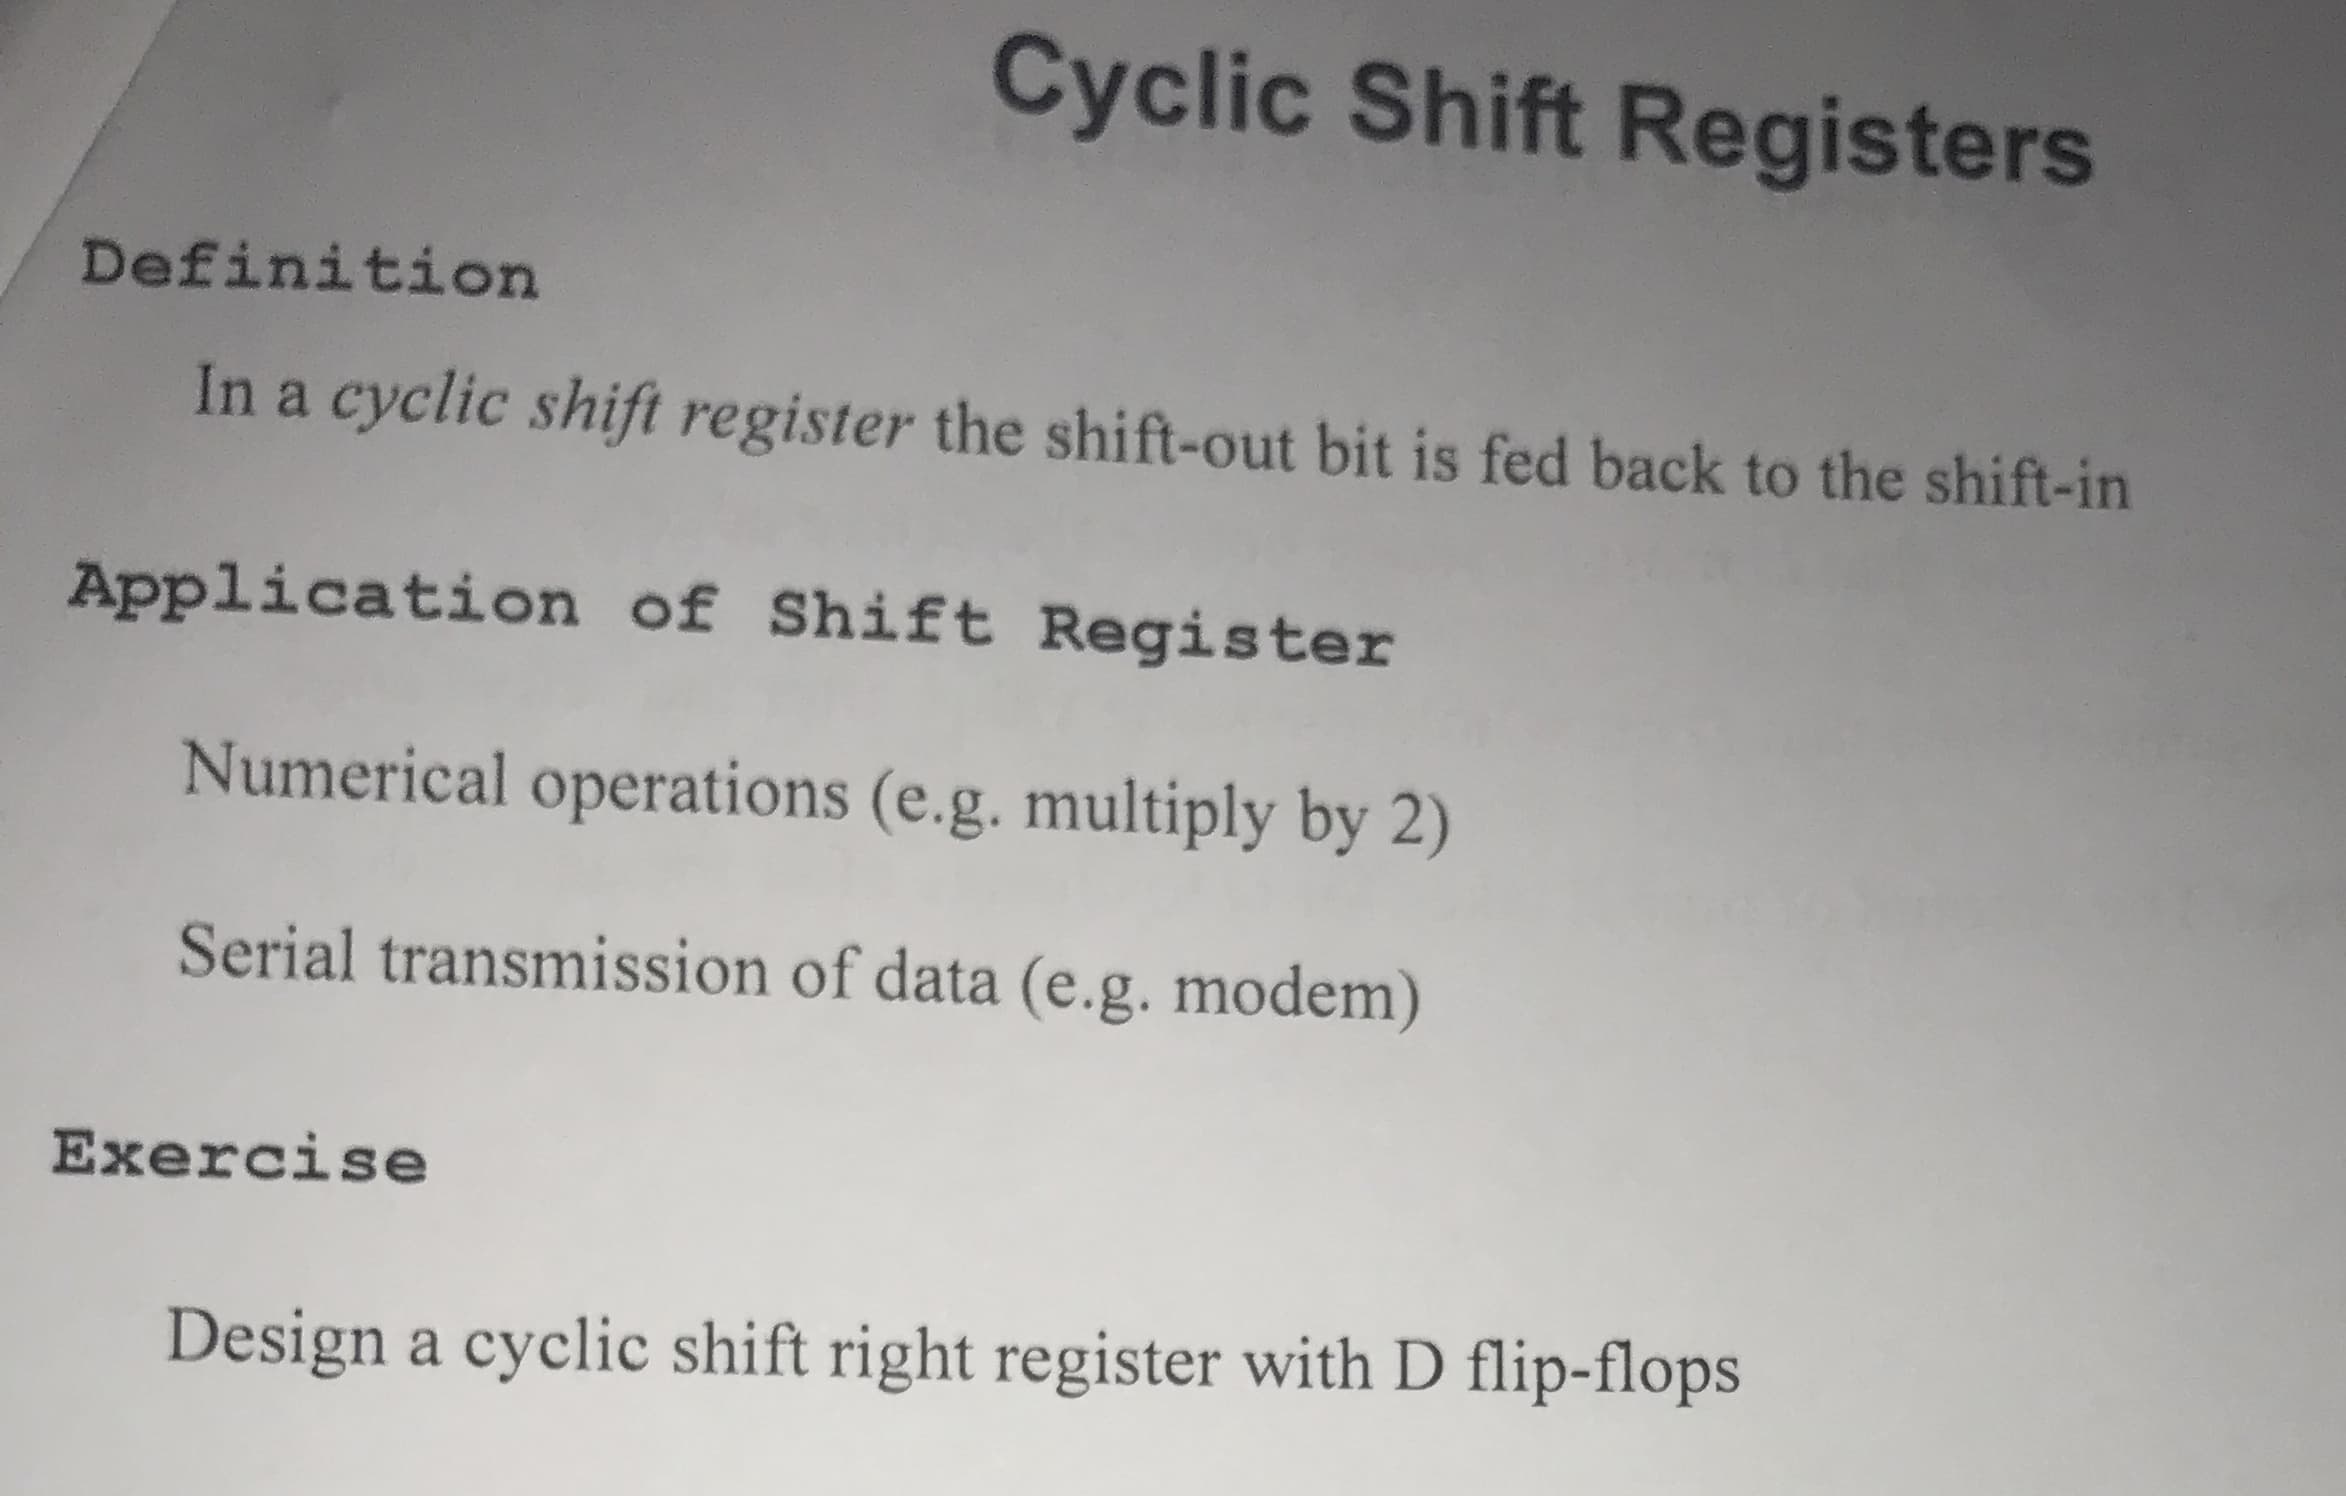 Cyclic Shift Registers
Definition
In a cyclic shift register the shift-out bit is fed back to the shift-in
Application of Shift Register
Numerical operations (e.g. multiply by 2)
Serial transmission of data (e.g. modem)
Exercise
Design a cyclic shift right register with D flip-flops
